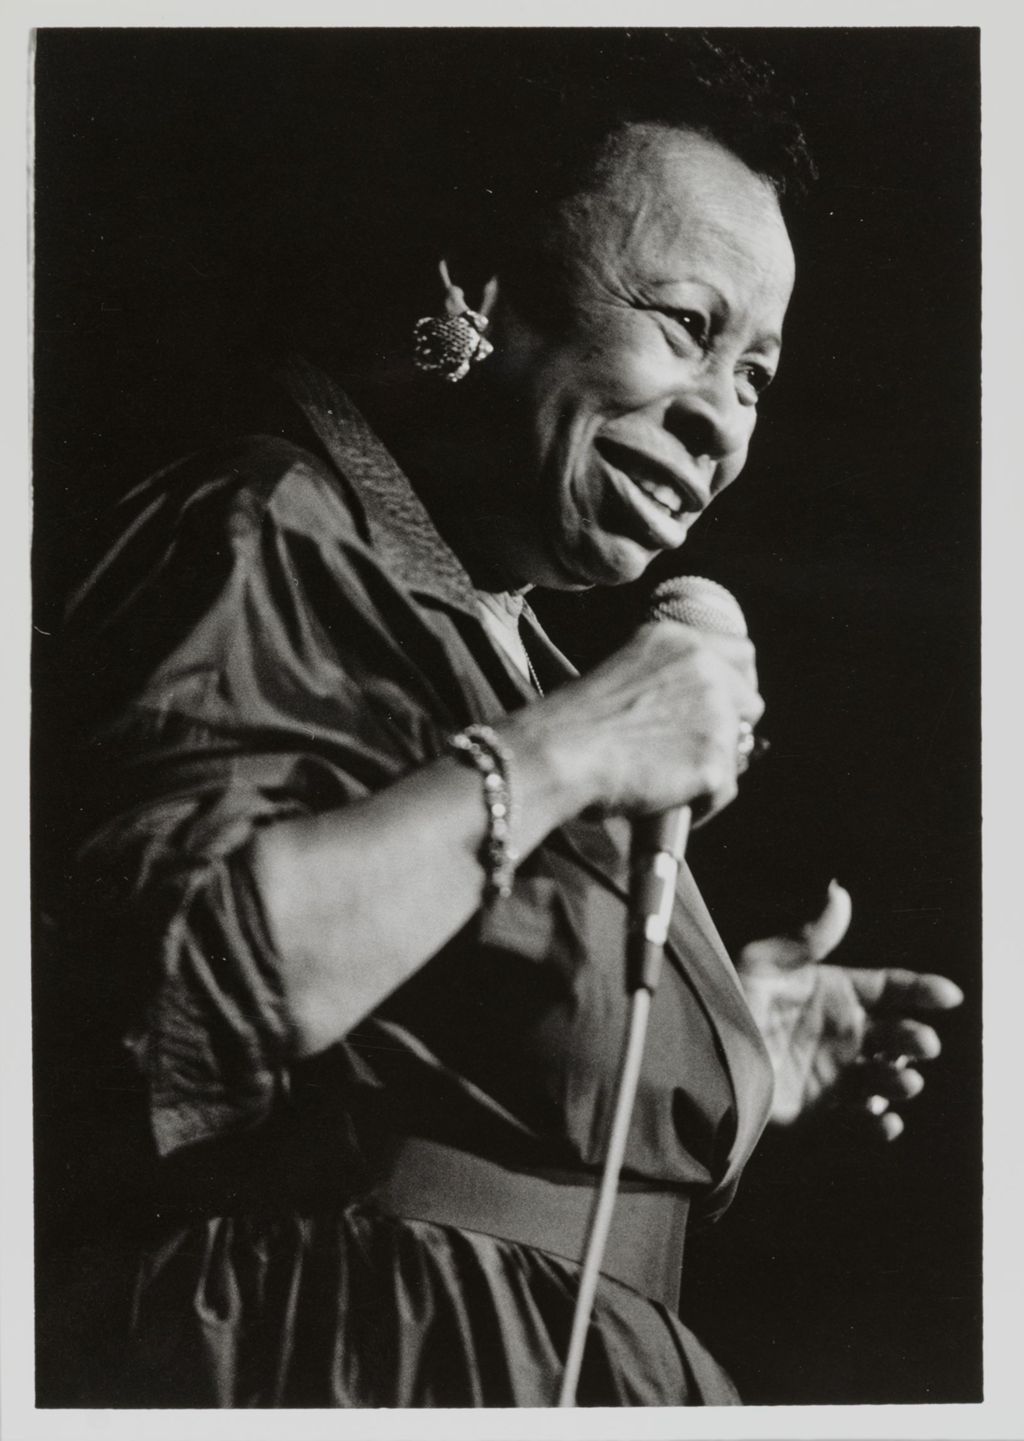 Betty Carter at the 11th Annual Jazz Fest